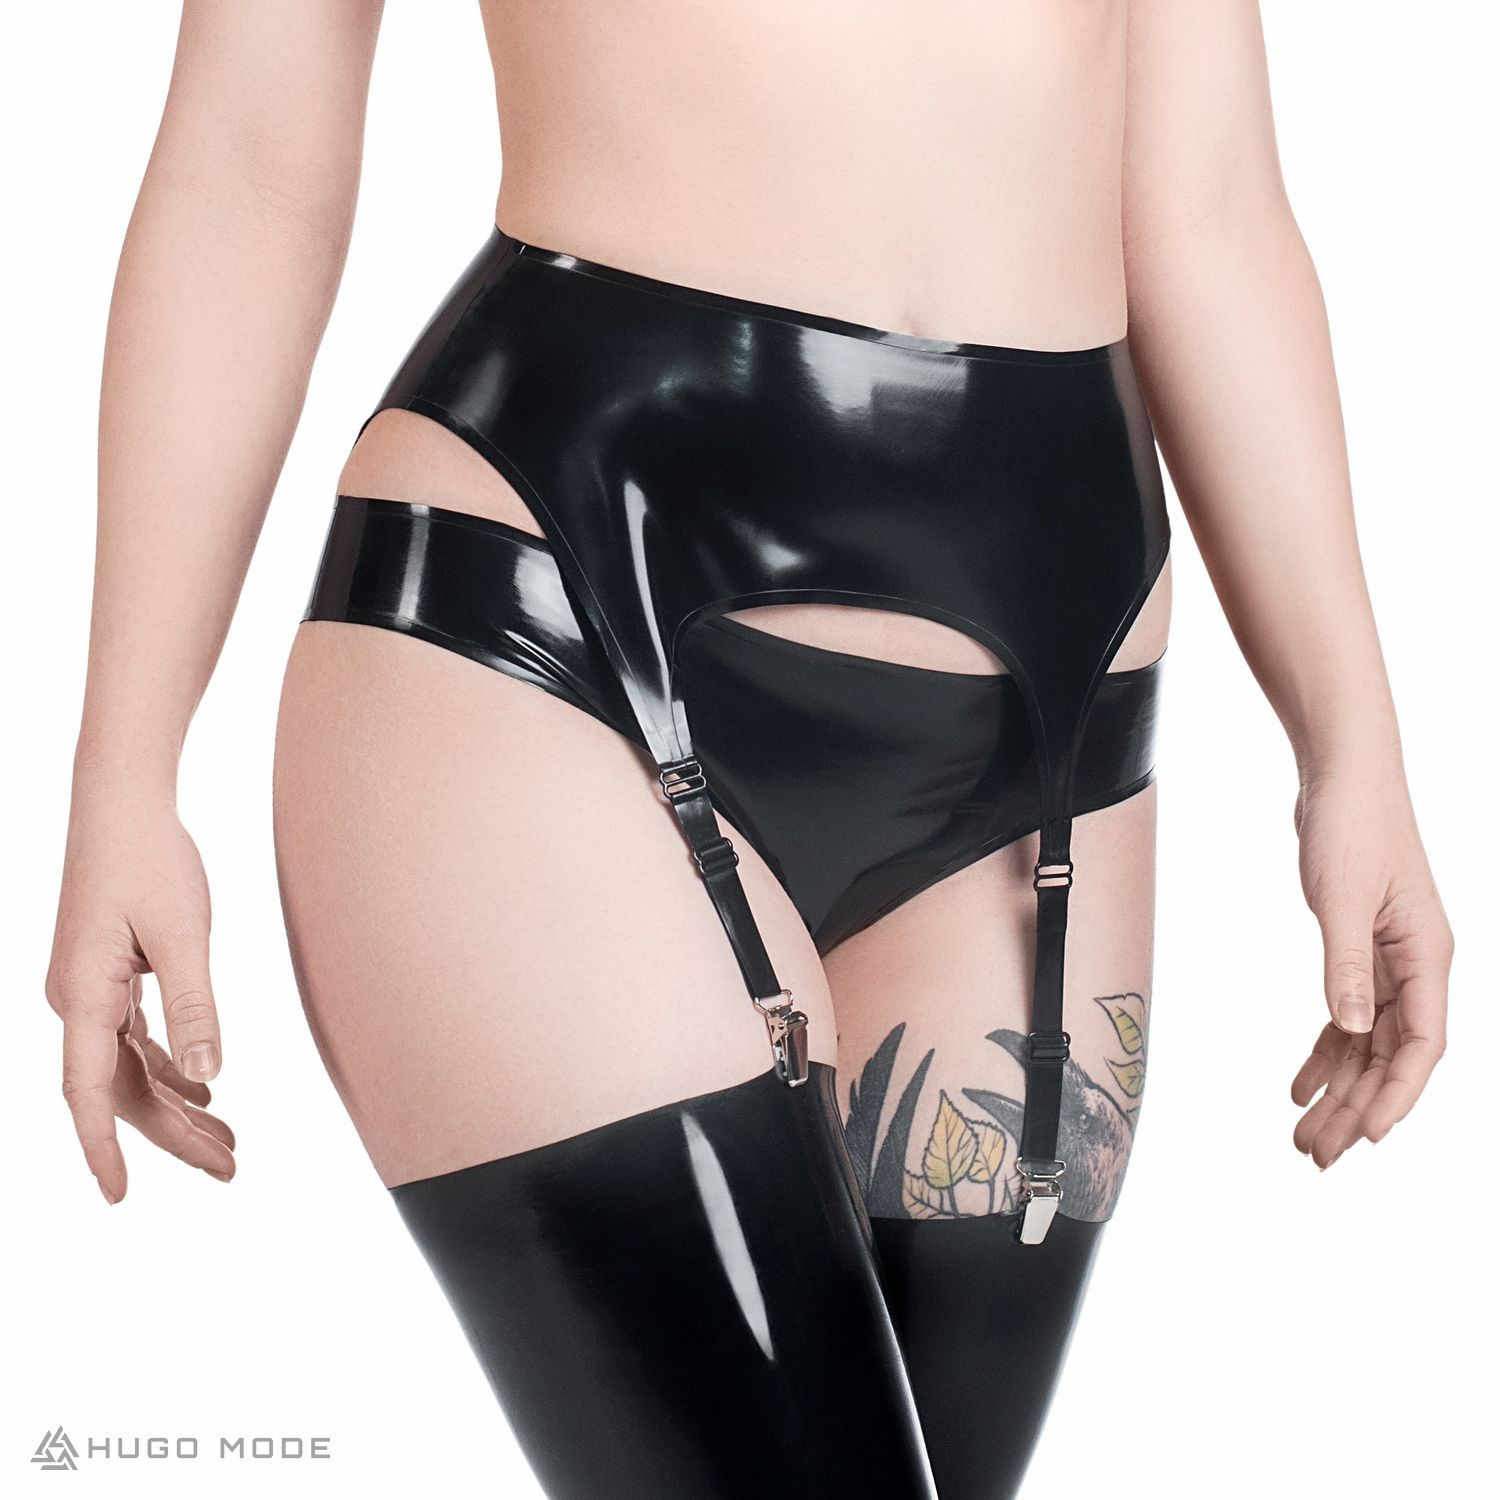 A black latex garter belt with reinforced edges and four garter straps for fastening stockings.